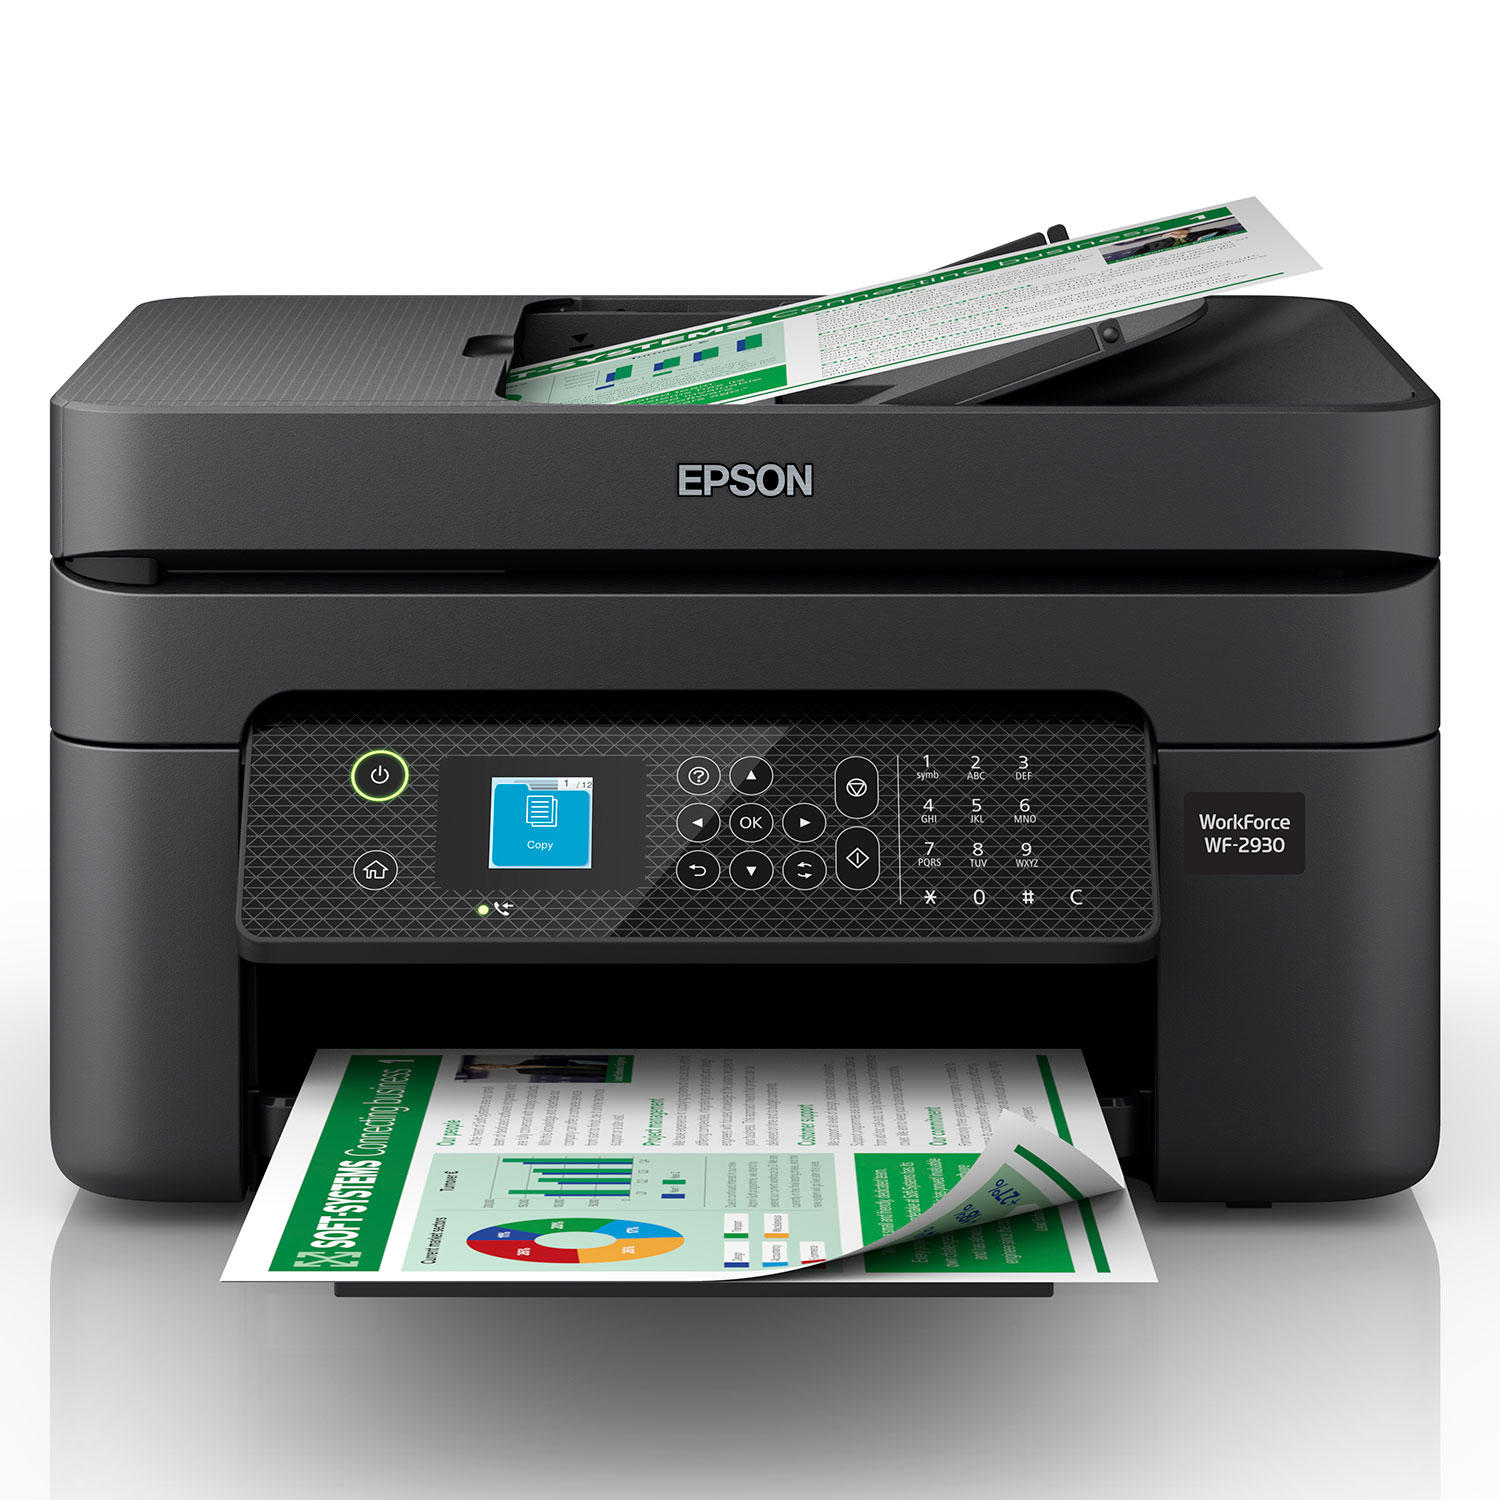 Epson WorkForce WF-2930 Special Edition All-in-One Printer